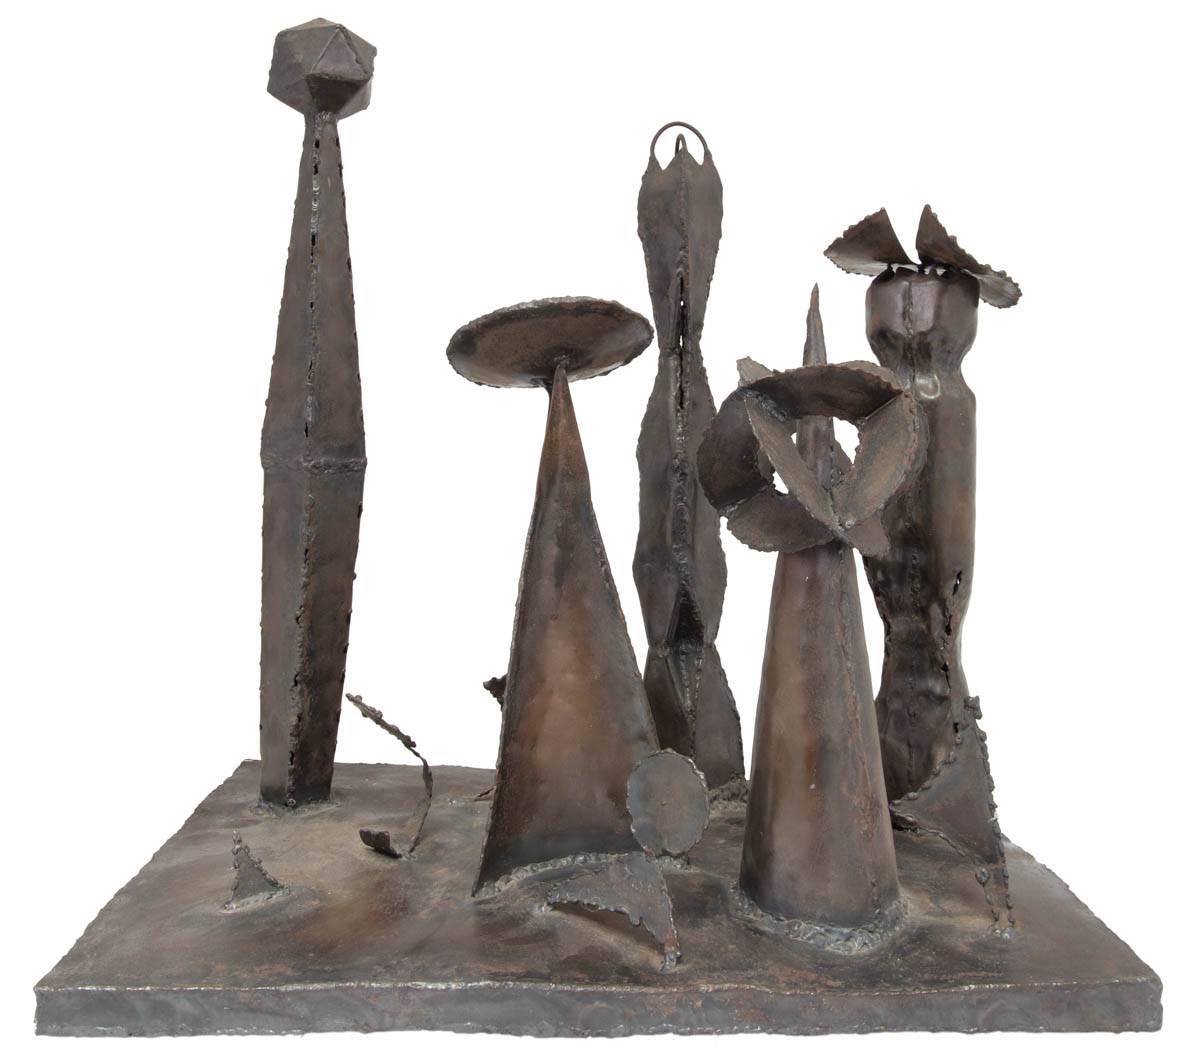 In this bronze sculpture the artist (unknown) has welded together a group of totems or monuments into a unified piece. T
Neo-Dada Abstract Sculpture: Assemblages

In contrast, abstract sculpture followed a slightly different course. Rather than